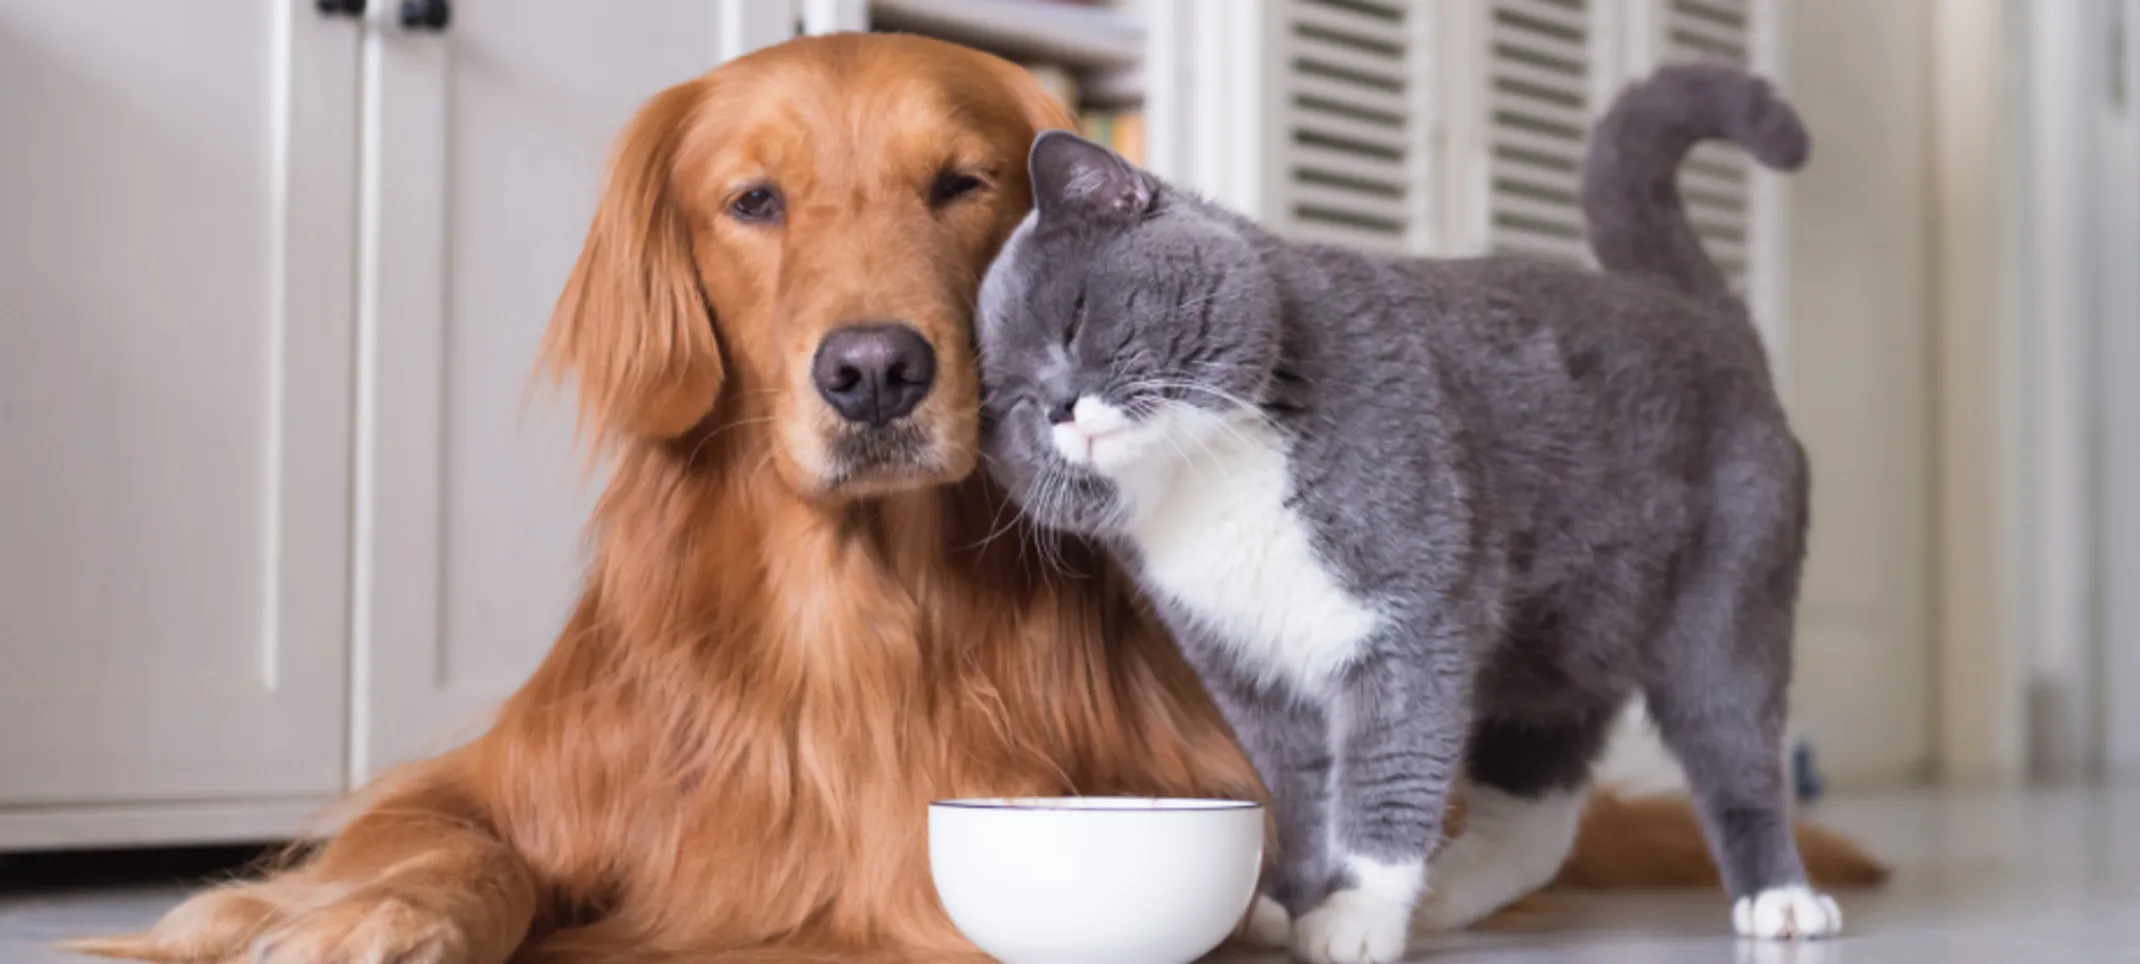 A Gray Cat Leaning Against a Brown Dog next to a Food Bowl